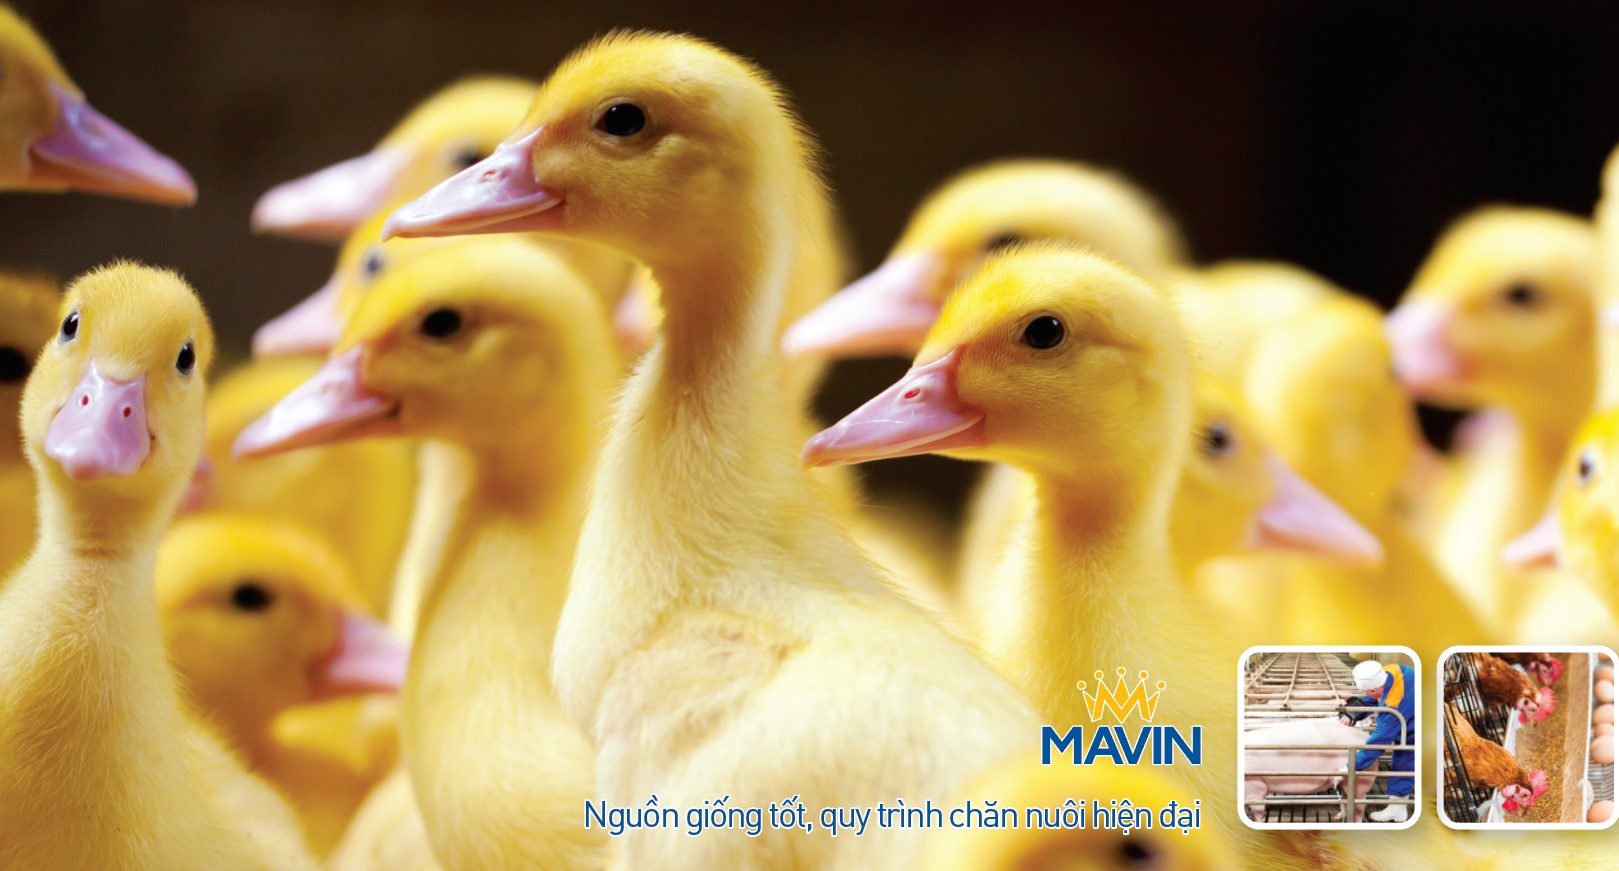 IFC considers $90.6m investment in Vietnamese animal feed firm Mavin